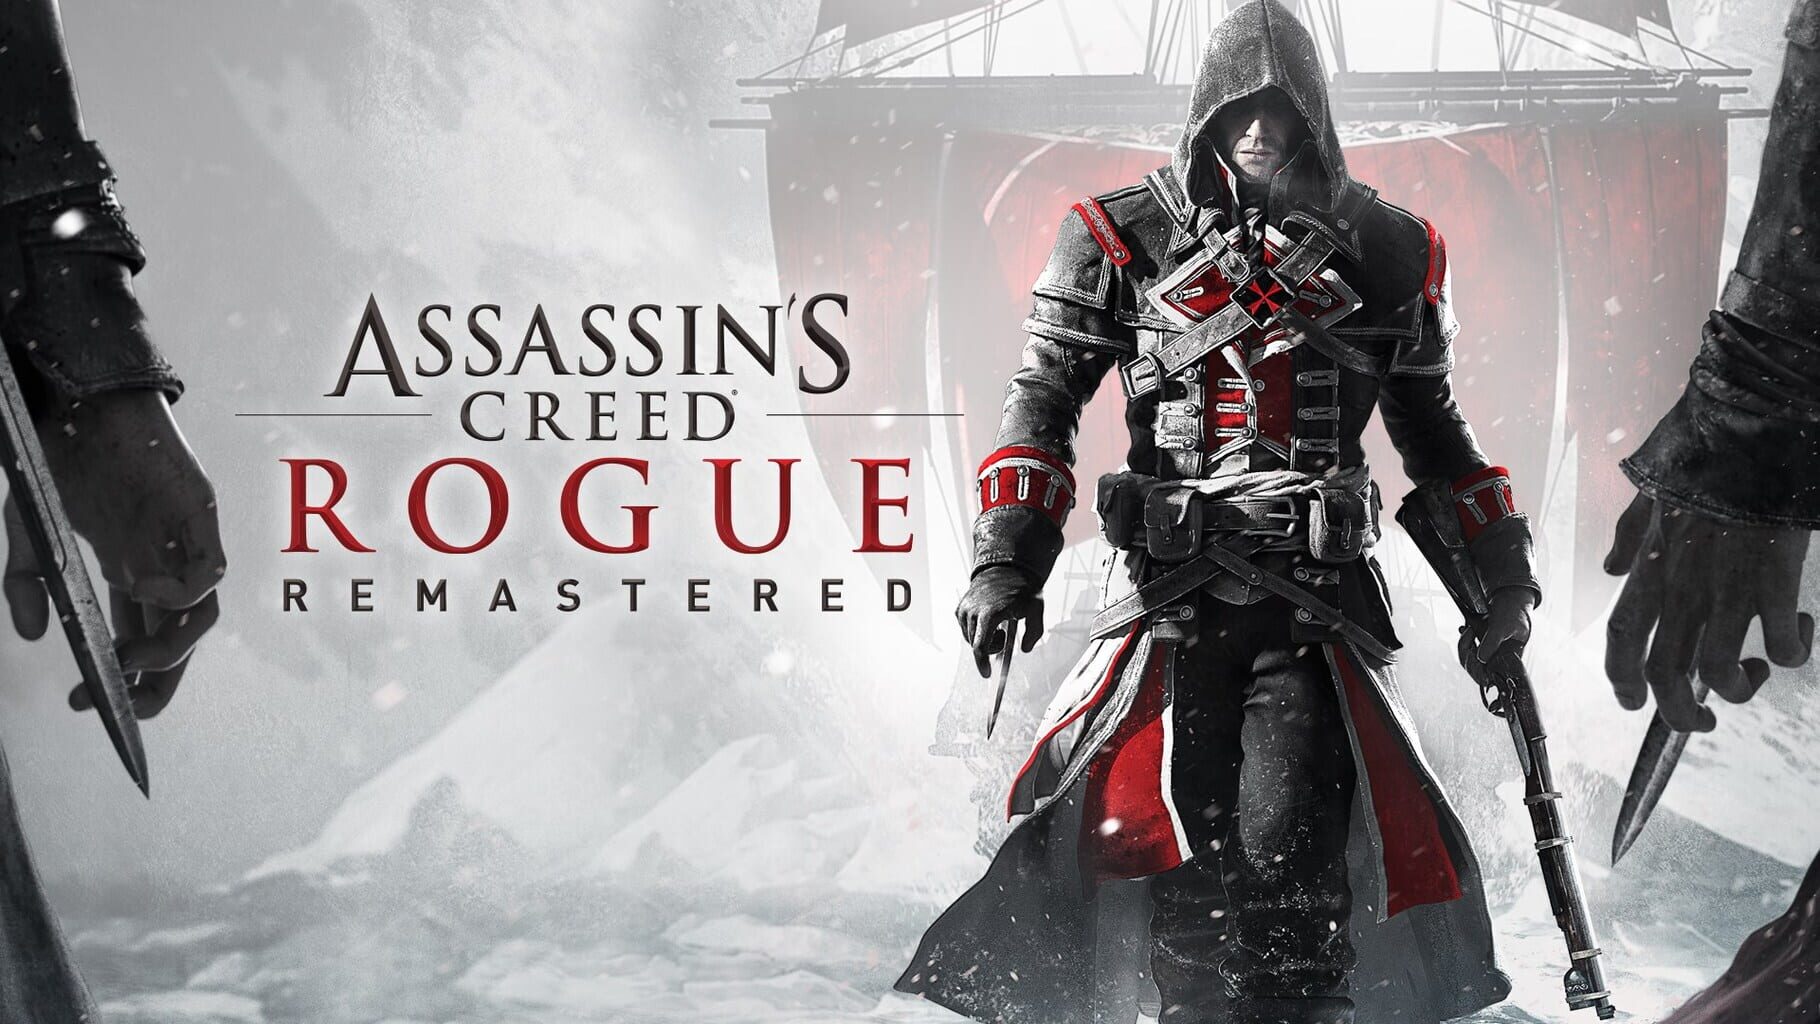 Arte - Assassin's Creed: Rogue Remastered